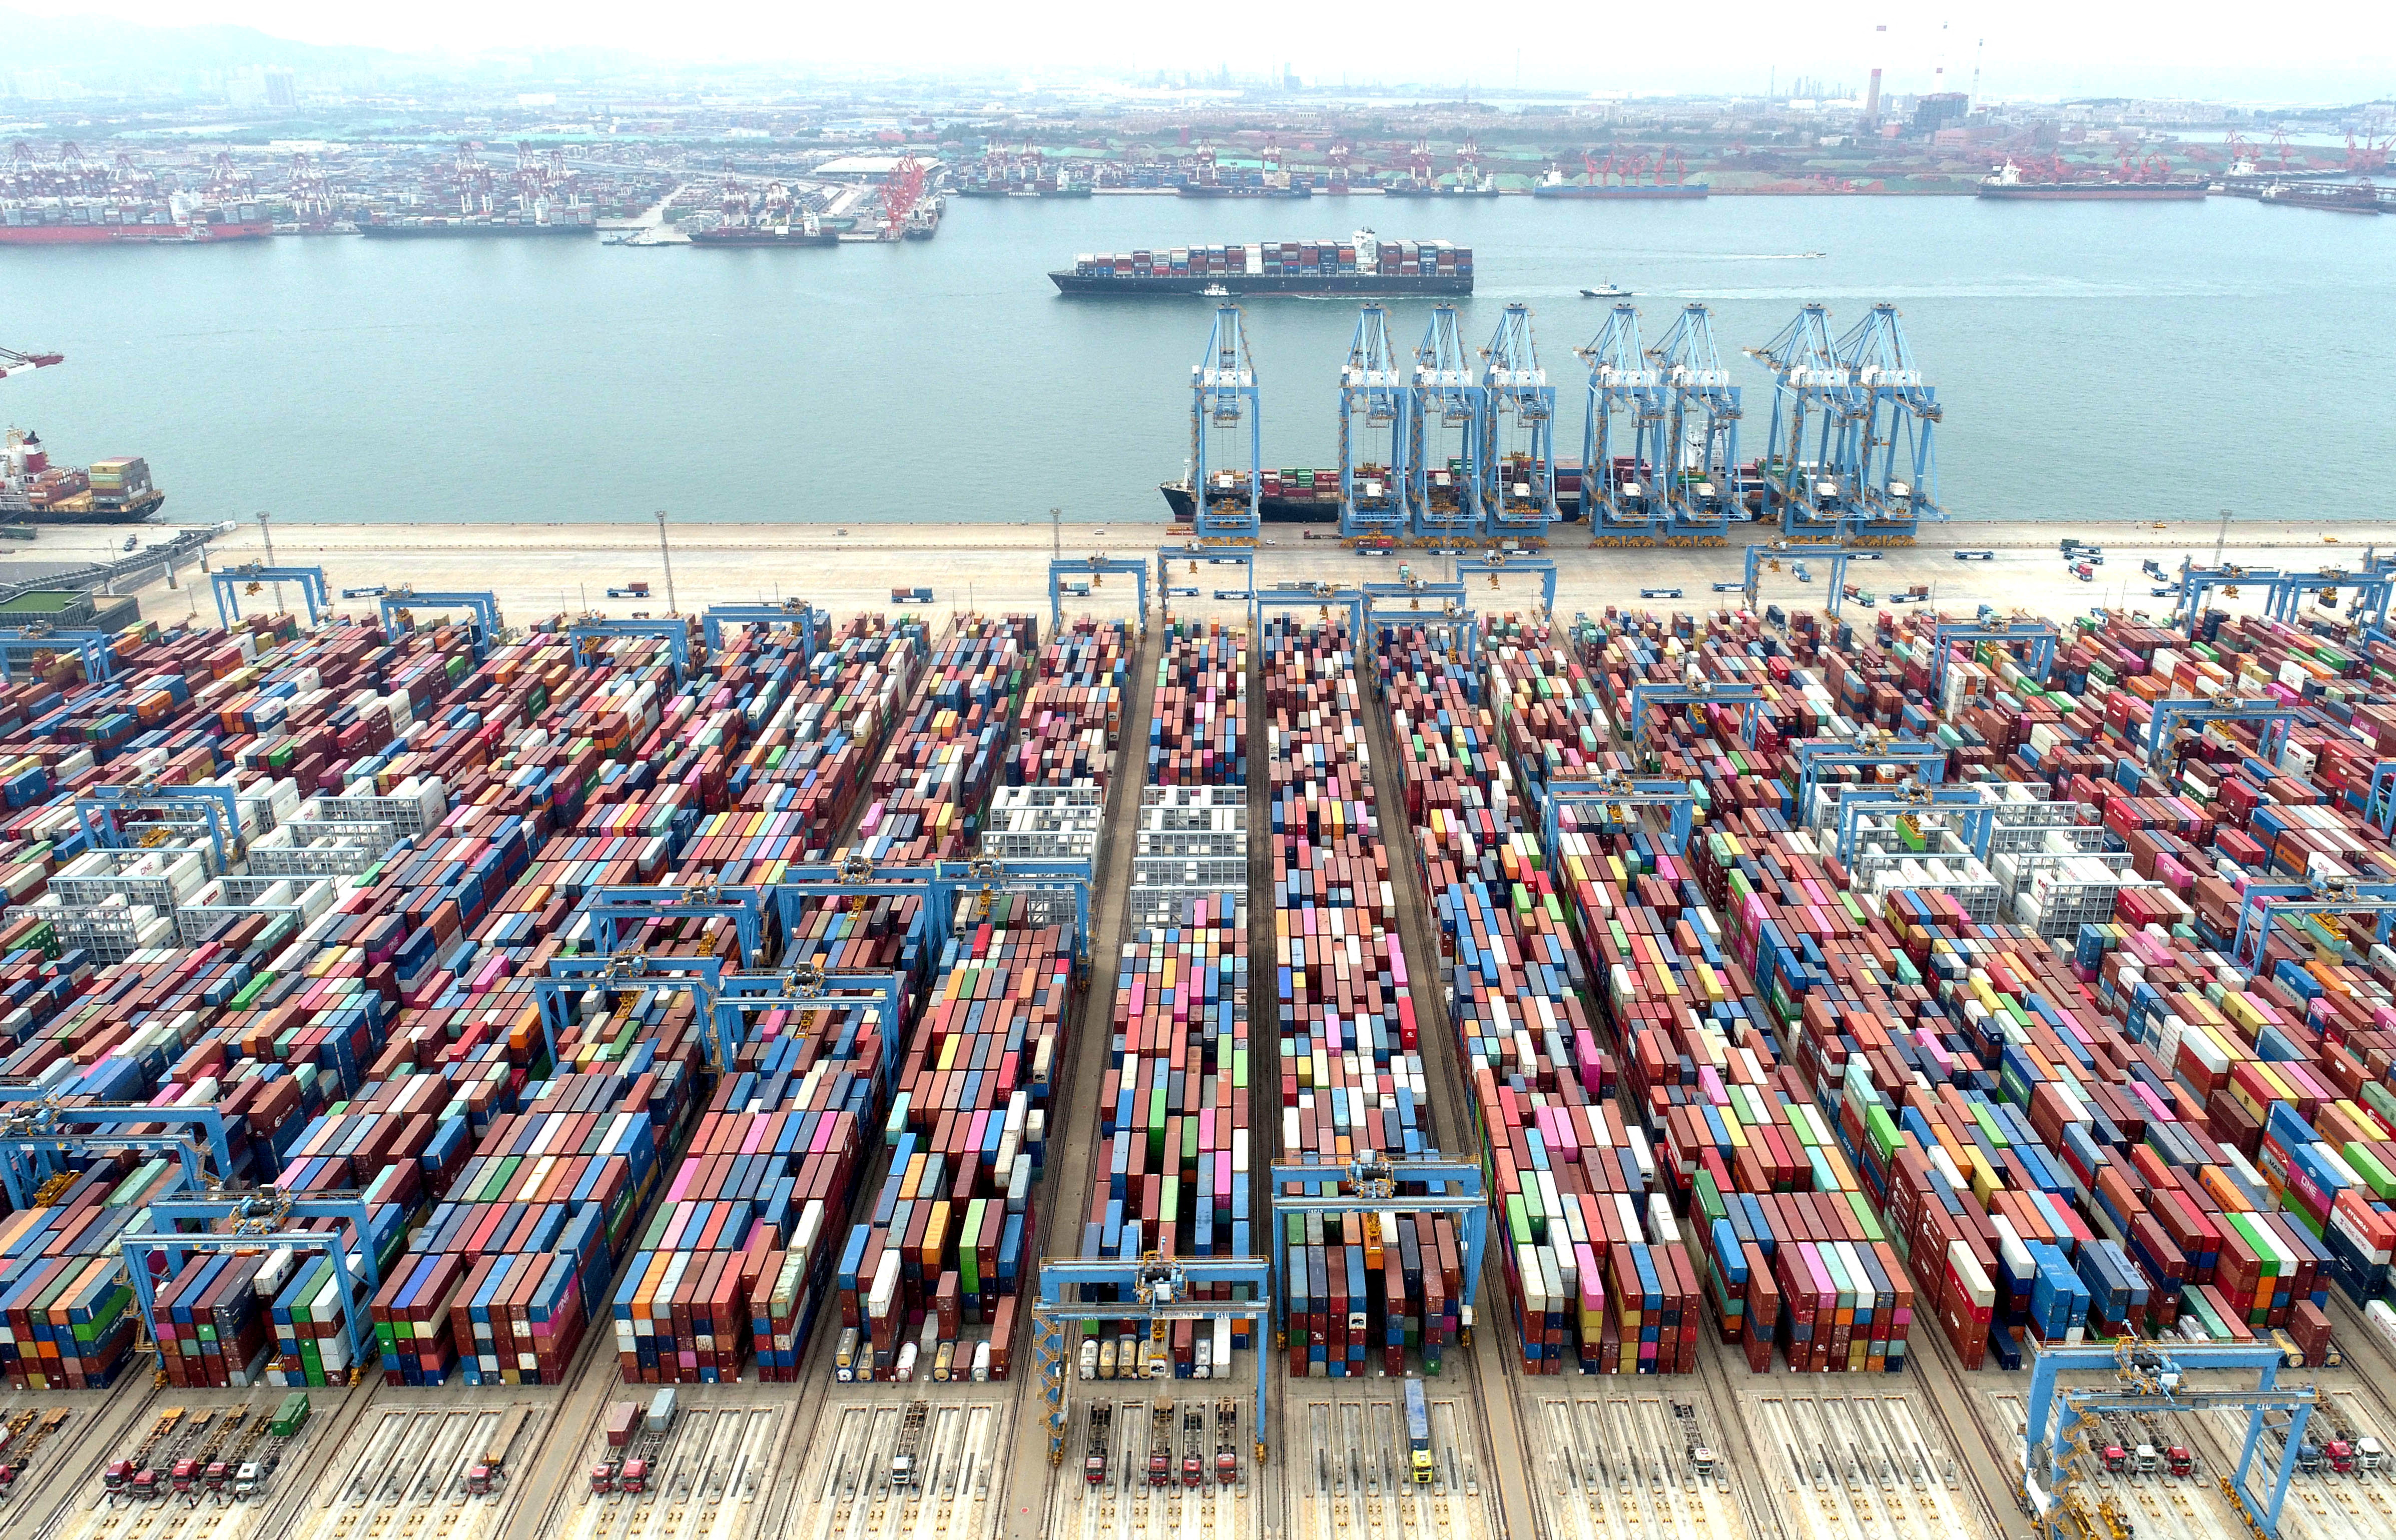 Containers and cargo ships in the port of Qingdao